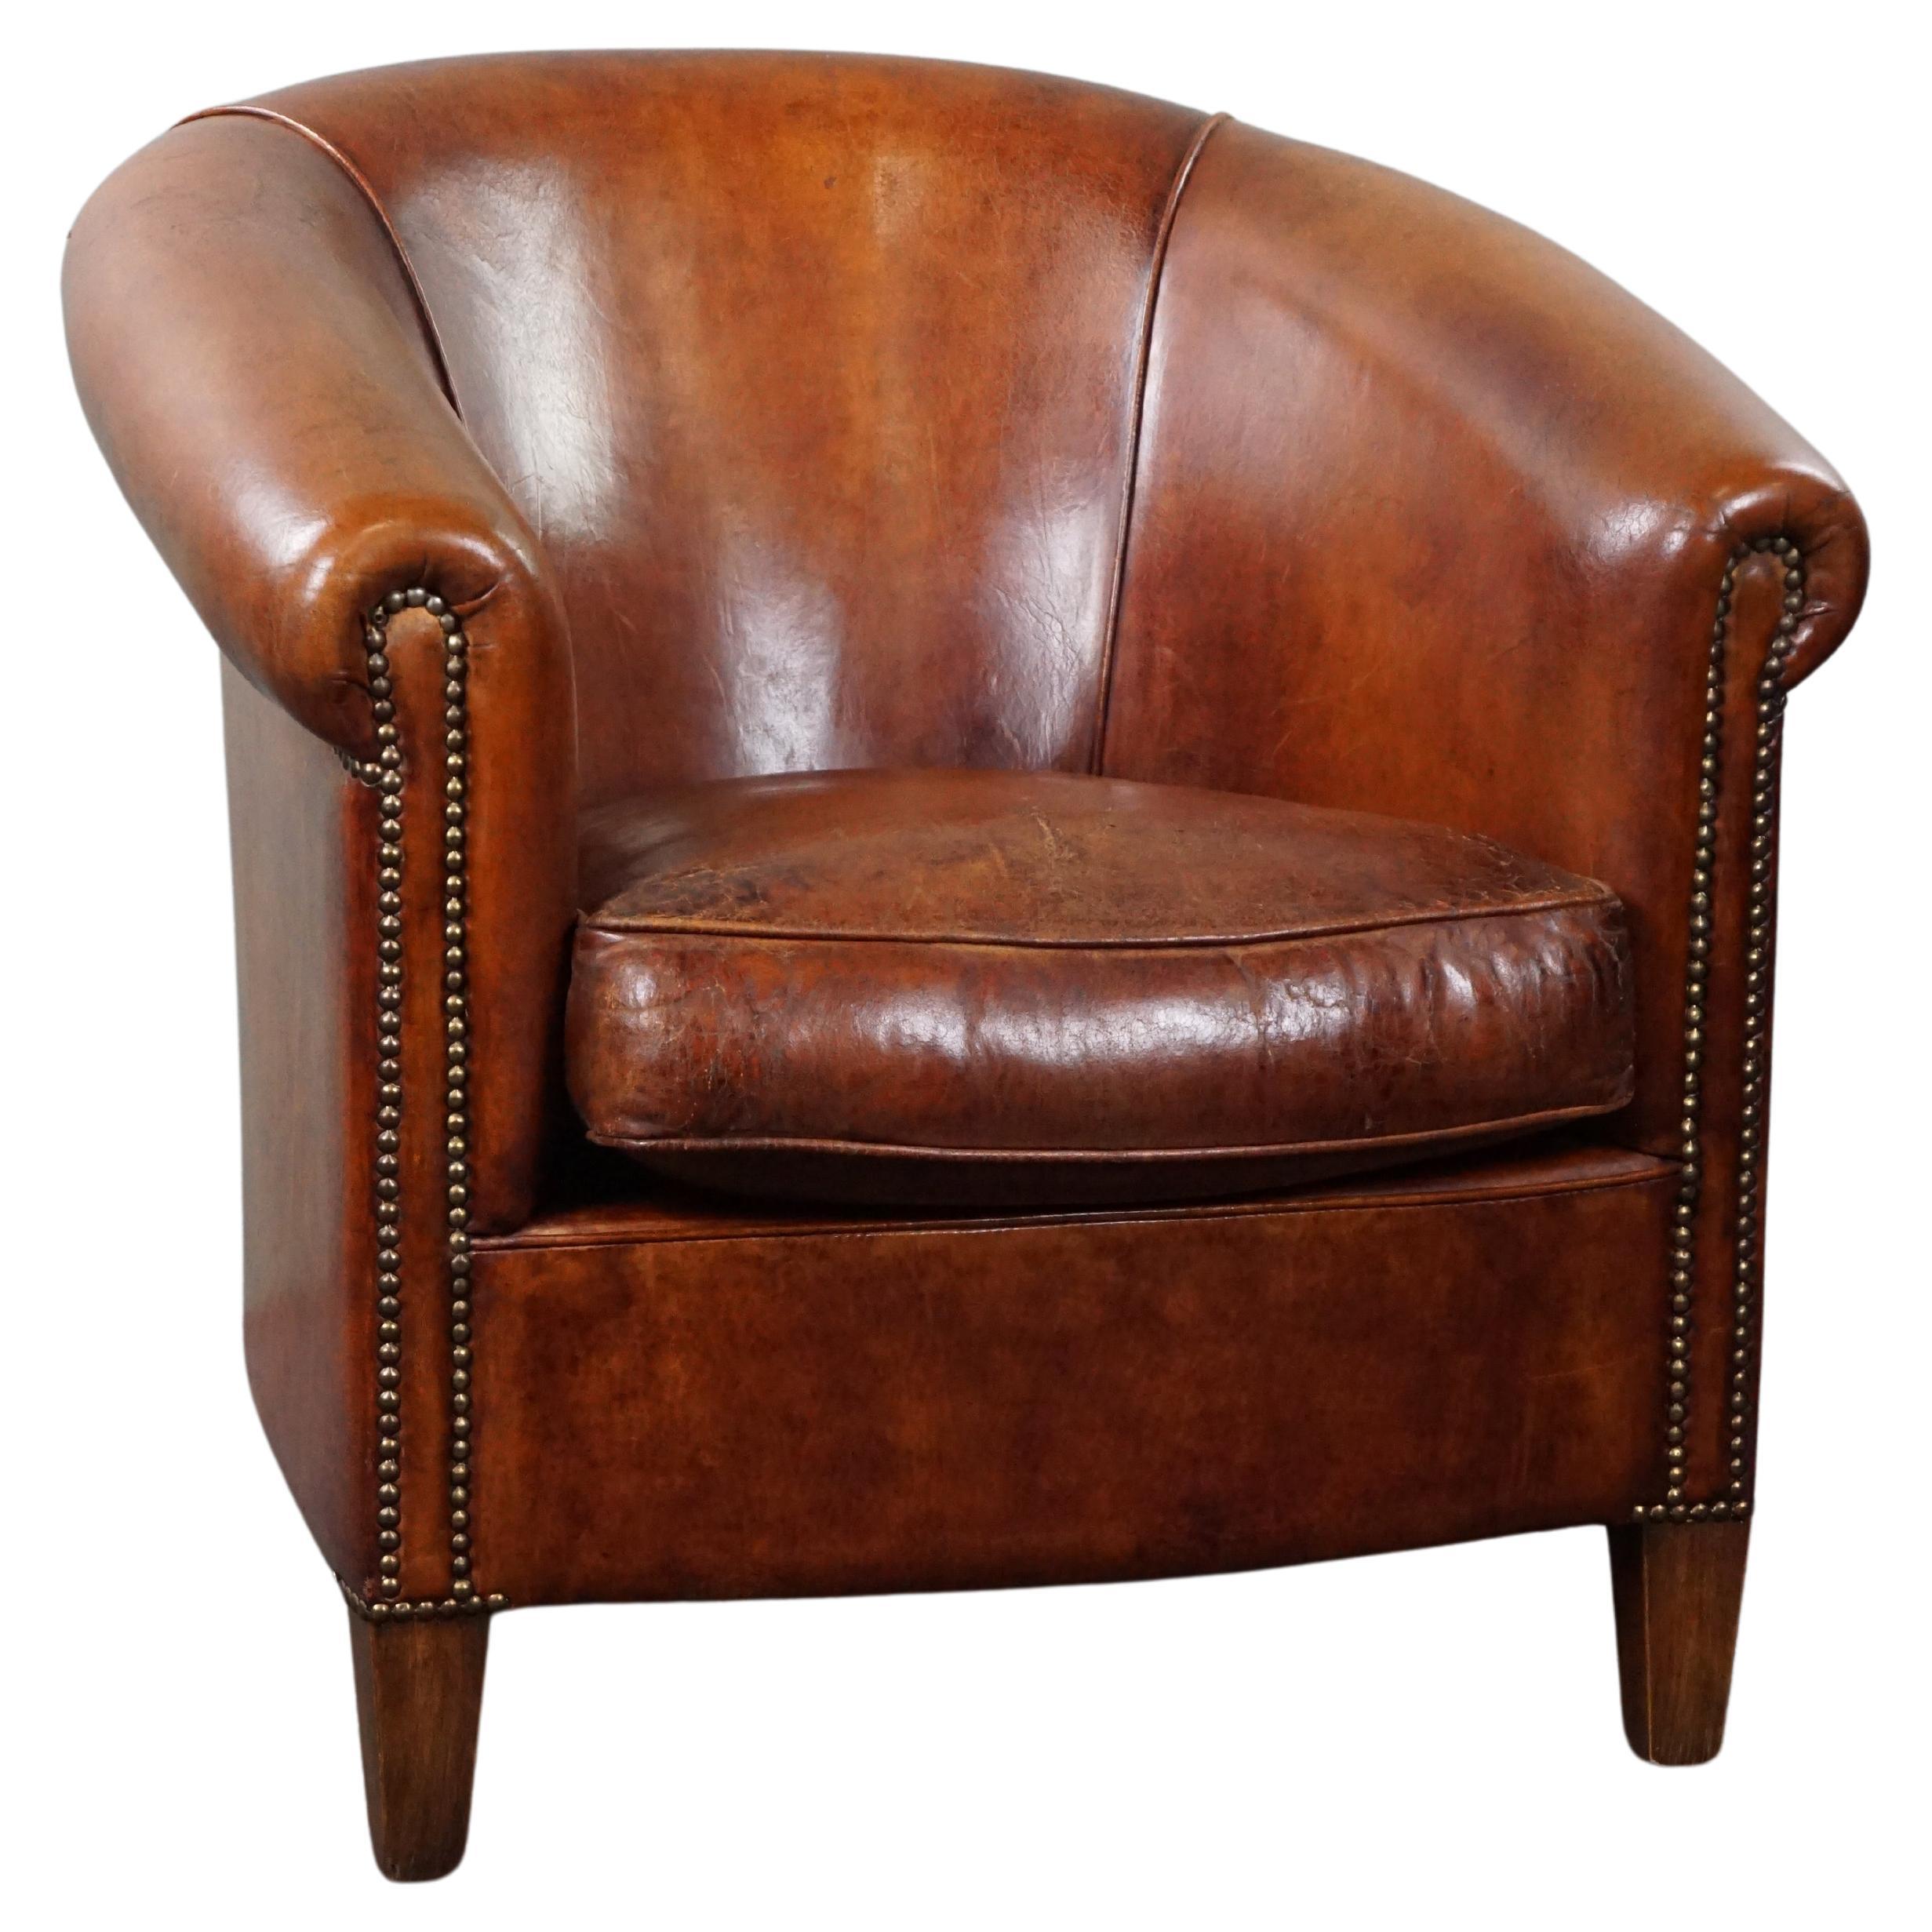 Comfortable sheep leather club armchair in a warm cognac/chestnut color For Sale